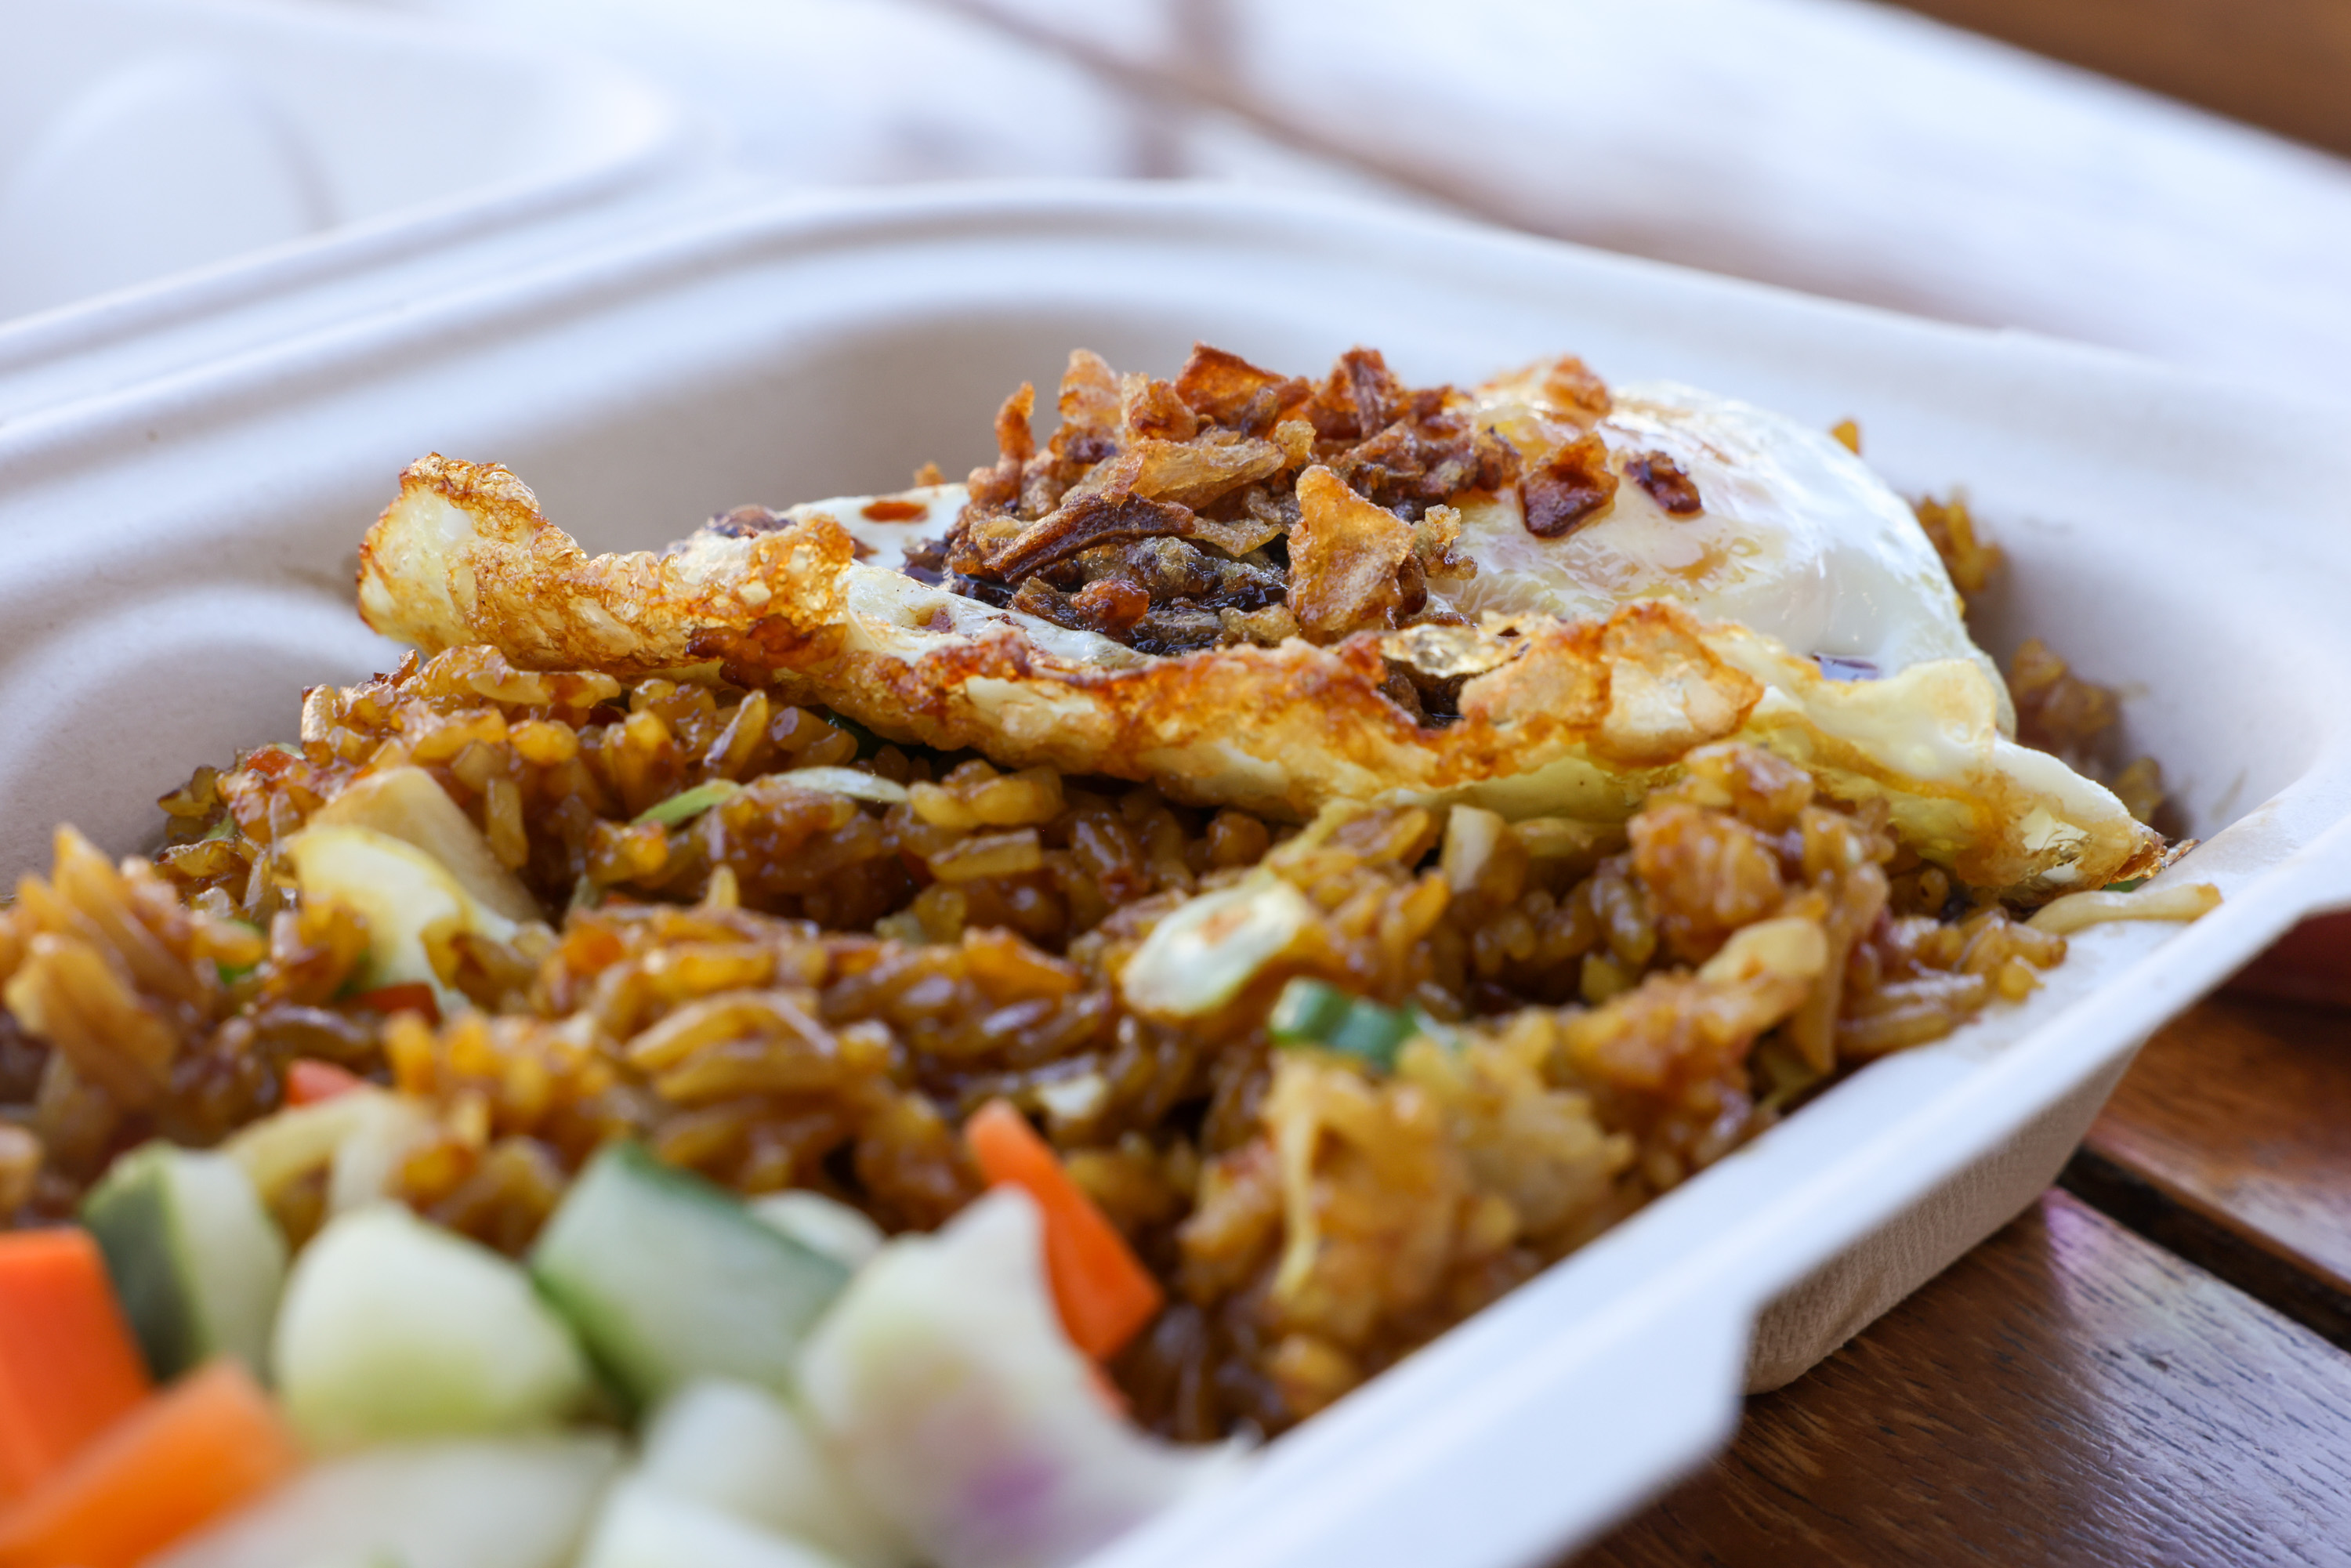 Fried rice topped with a sunny side up egg and crispy fried onions, served with a side of diced cucumber and carrots in a white takeout container.